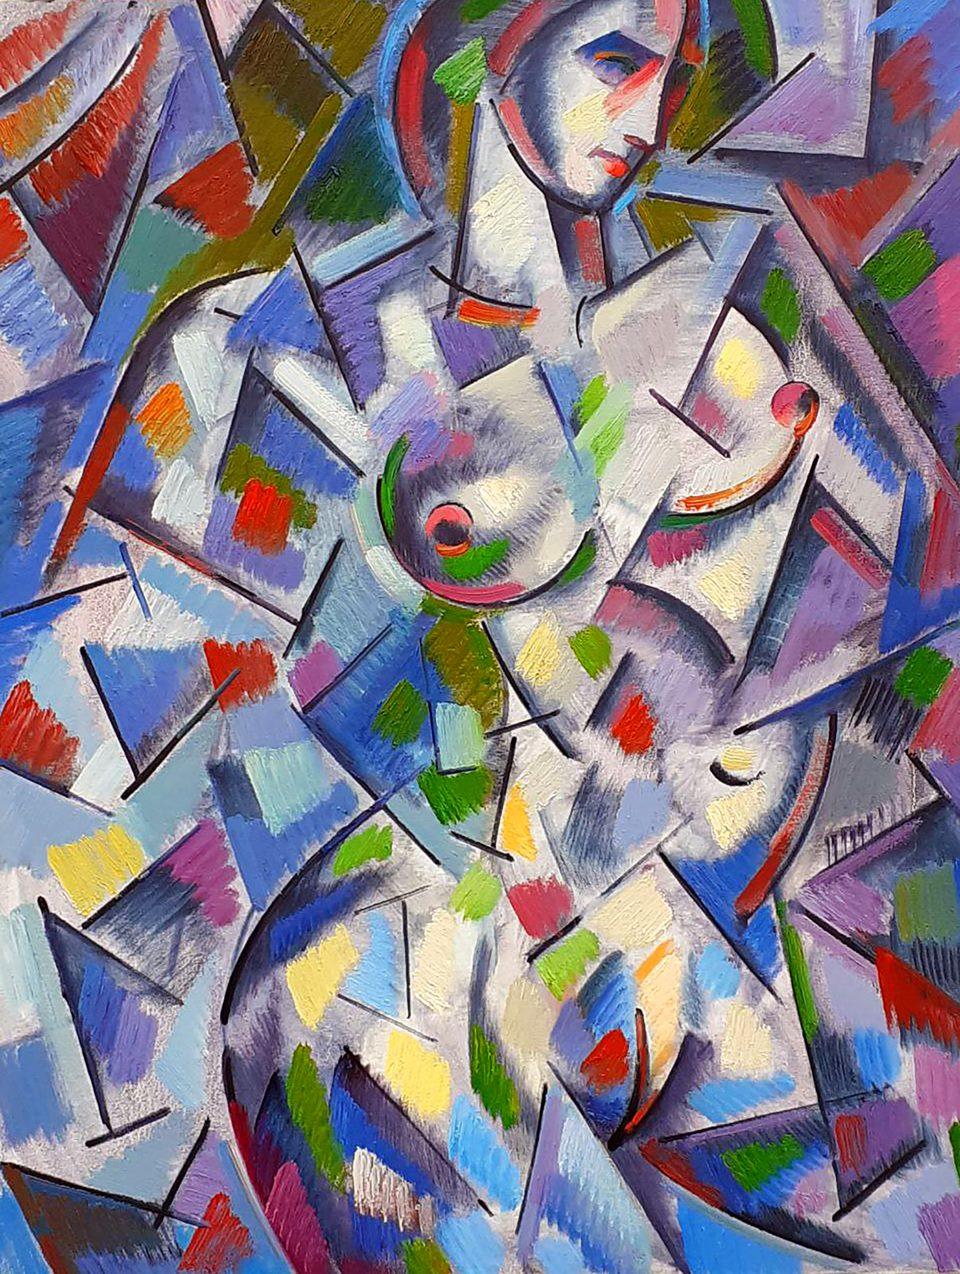 Peter Tovpev Figurative Painting - The Model, Cubism, Figurative, Original oil Painting, Ready to Hang